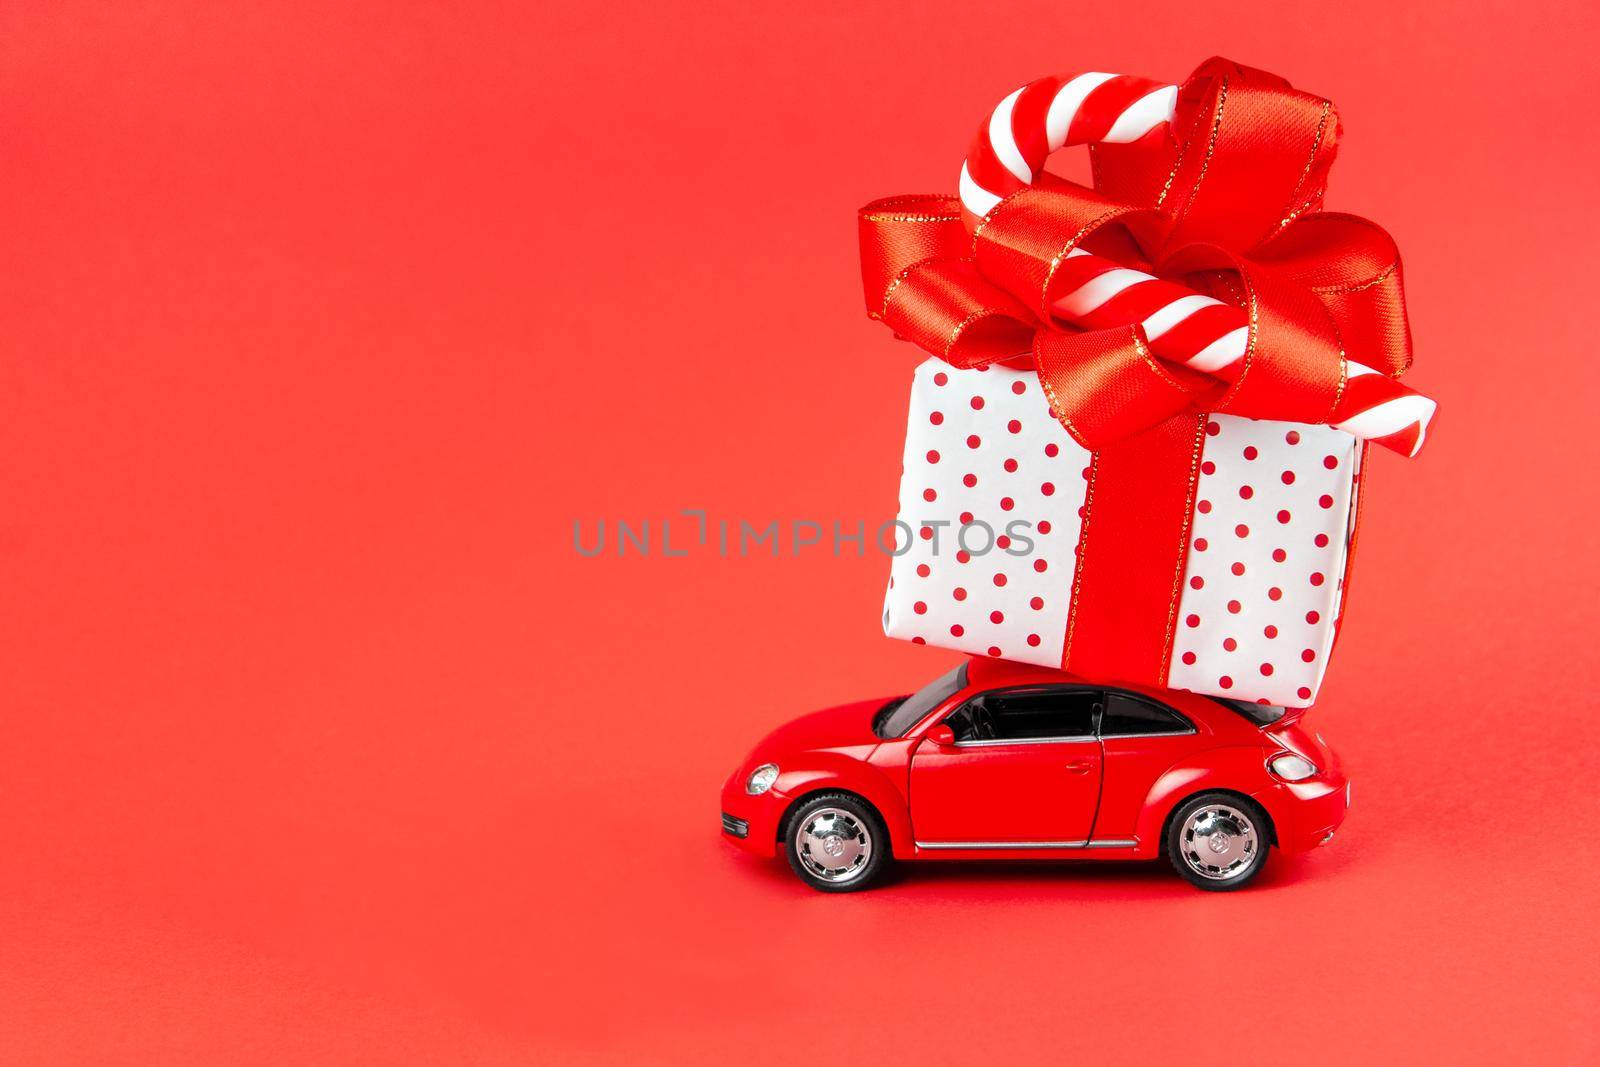 Moscow, Russia, January 14, 2021. Minimal design for celebrating christmas or new year greeting card. Gift delivery concept. Little red toy car with gift and candy on a red background.